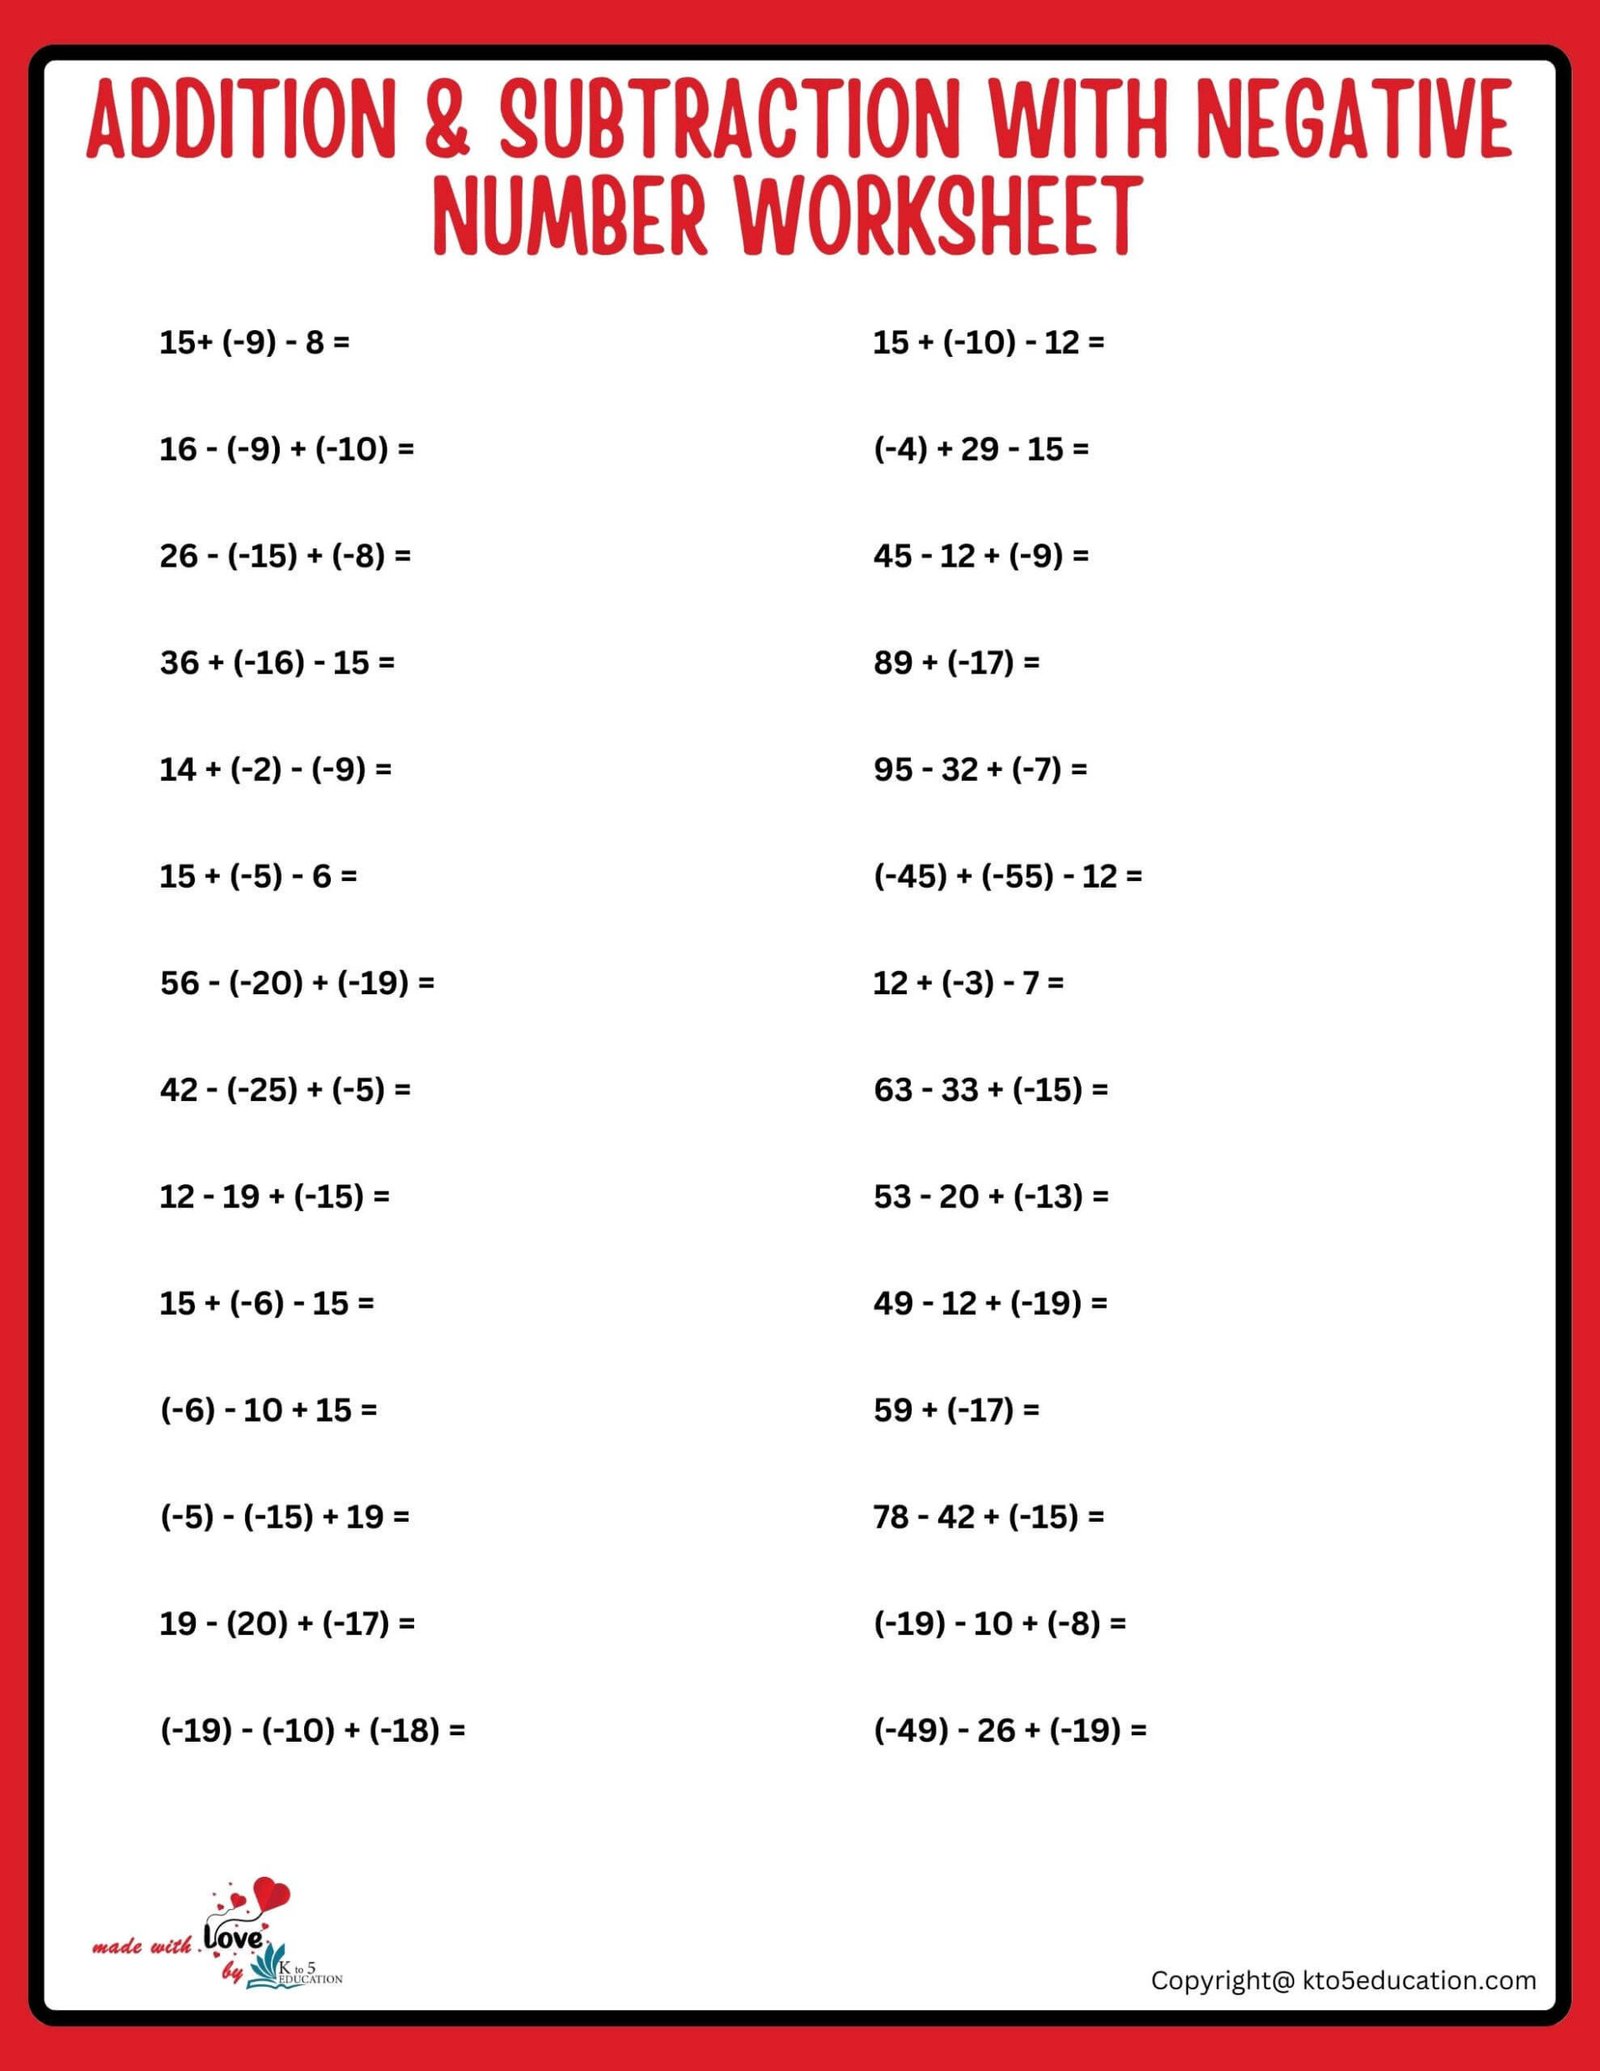 Addition And Subtraction Positive And Negative Worksheets